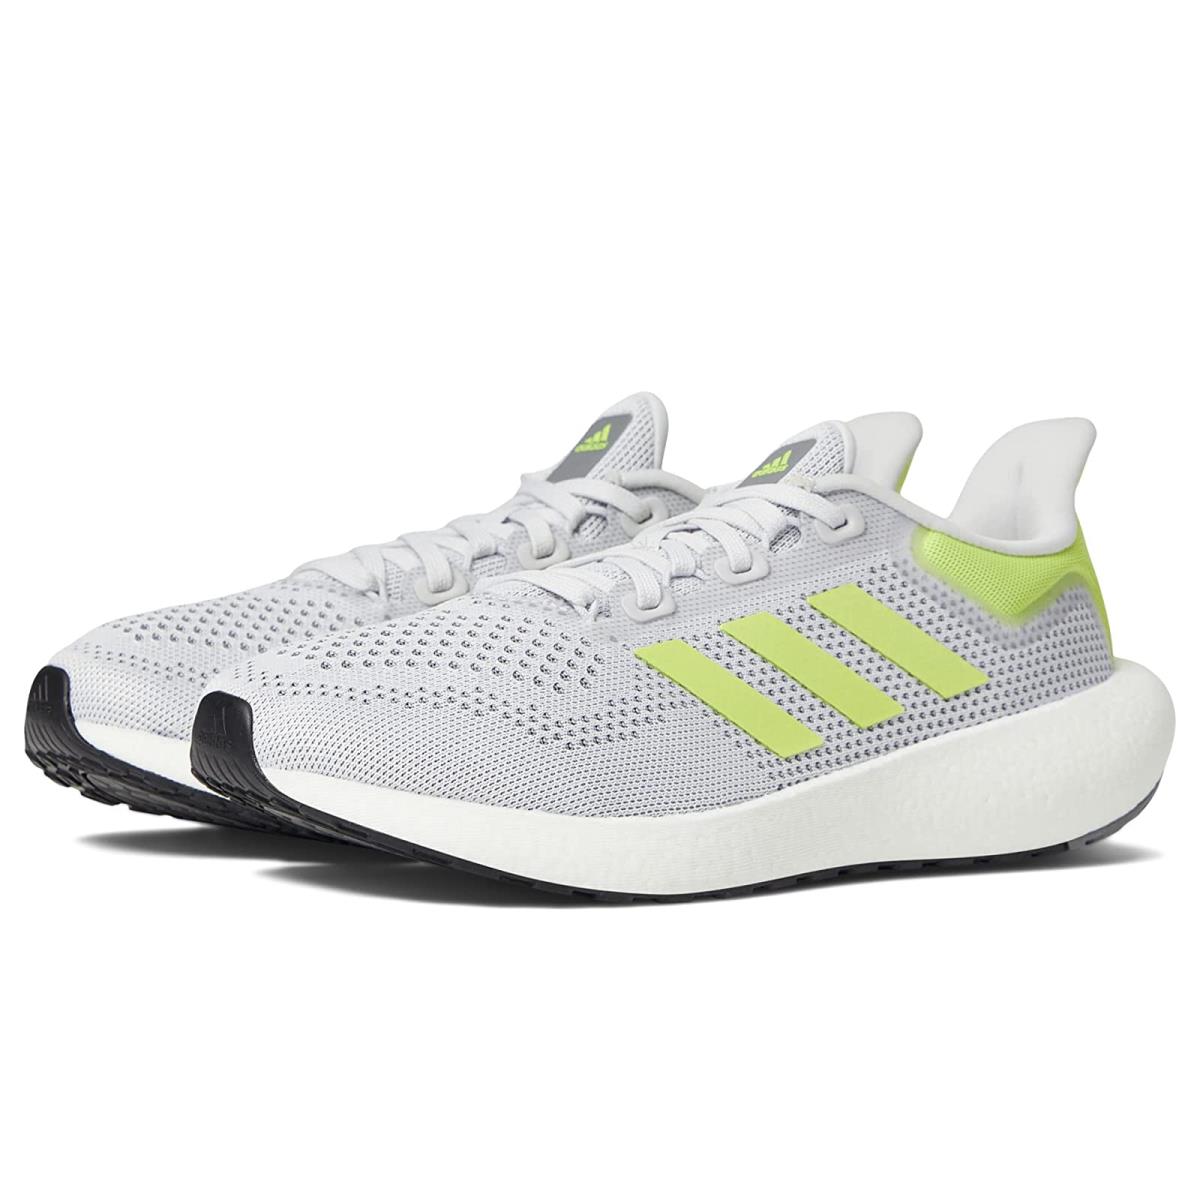 Man`s Sneakers Athletic Shoes Adidas Running Pureboost Jet Dash Grey/Pulse Lime/Black